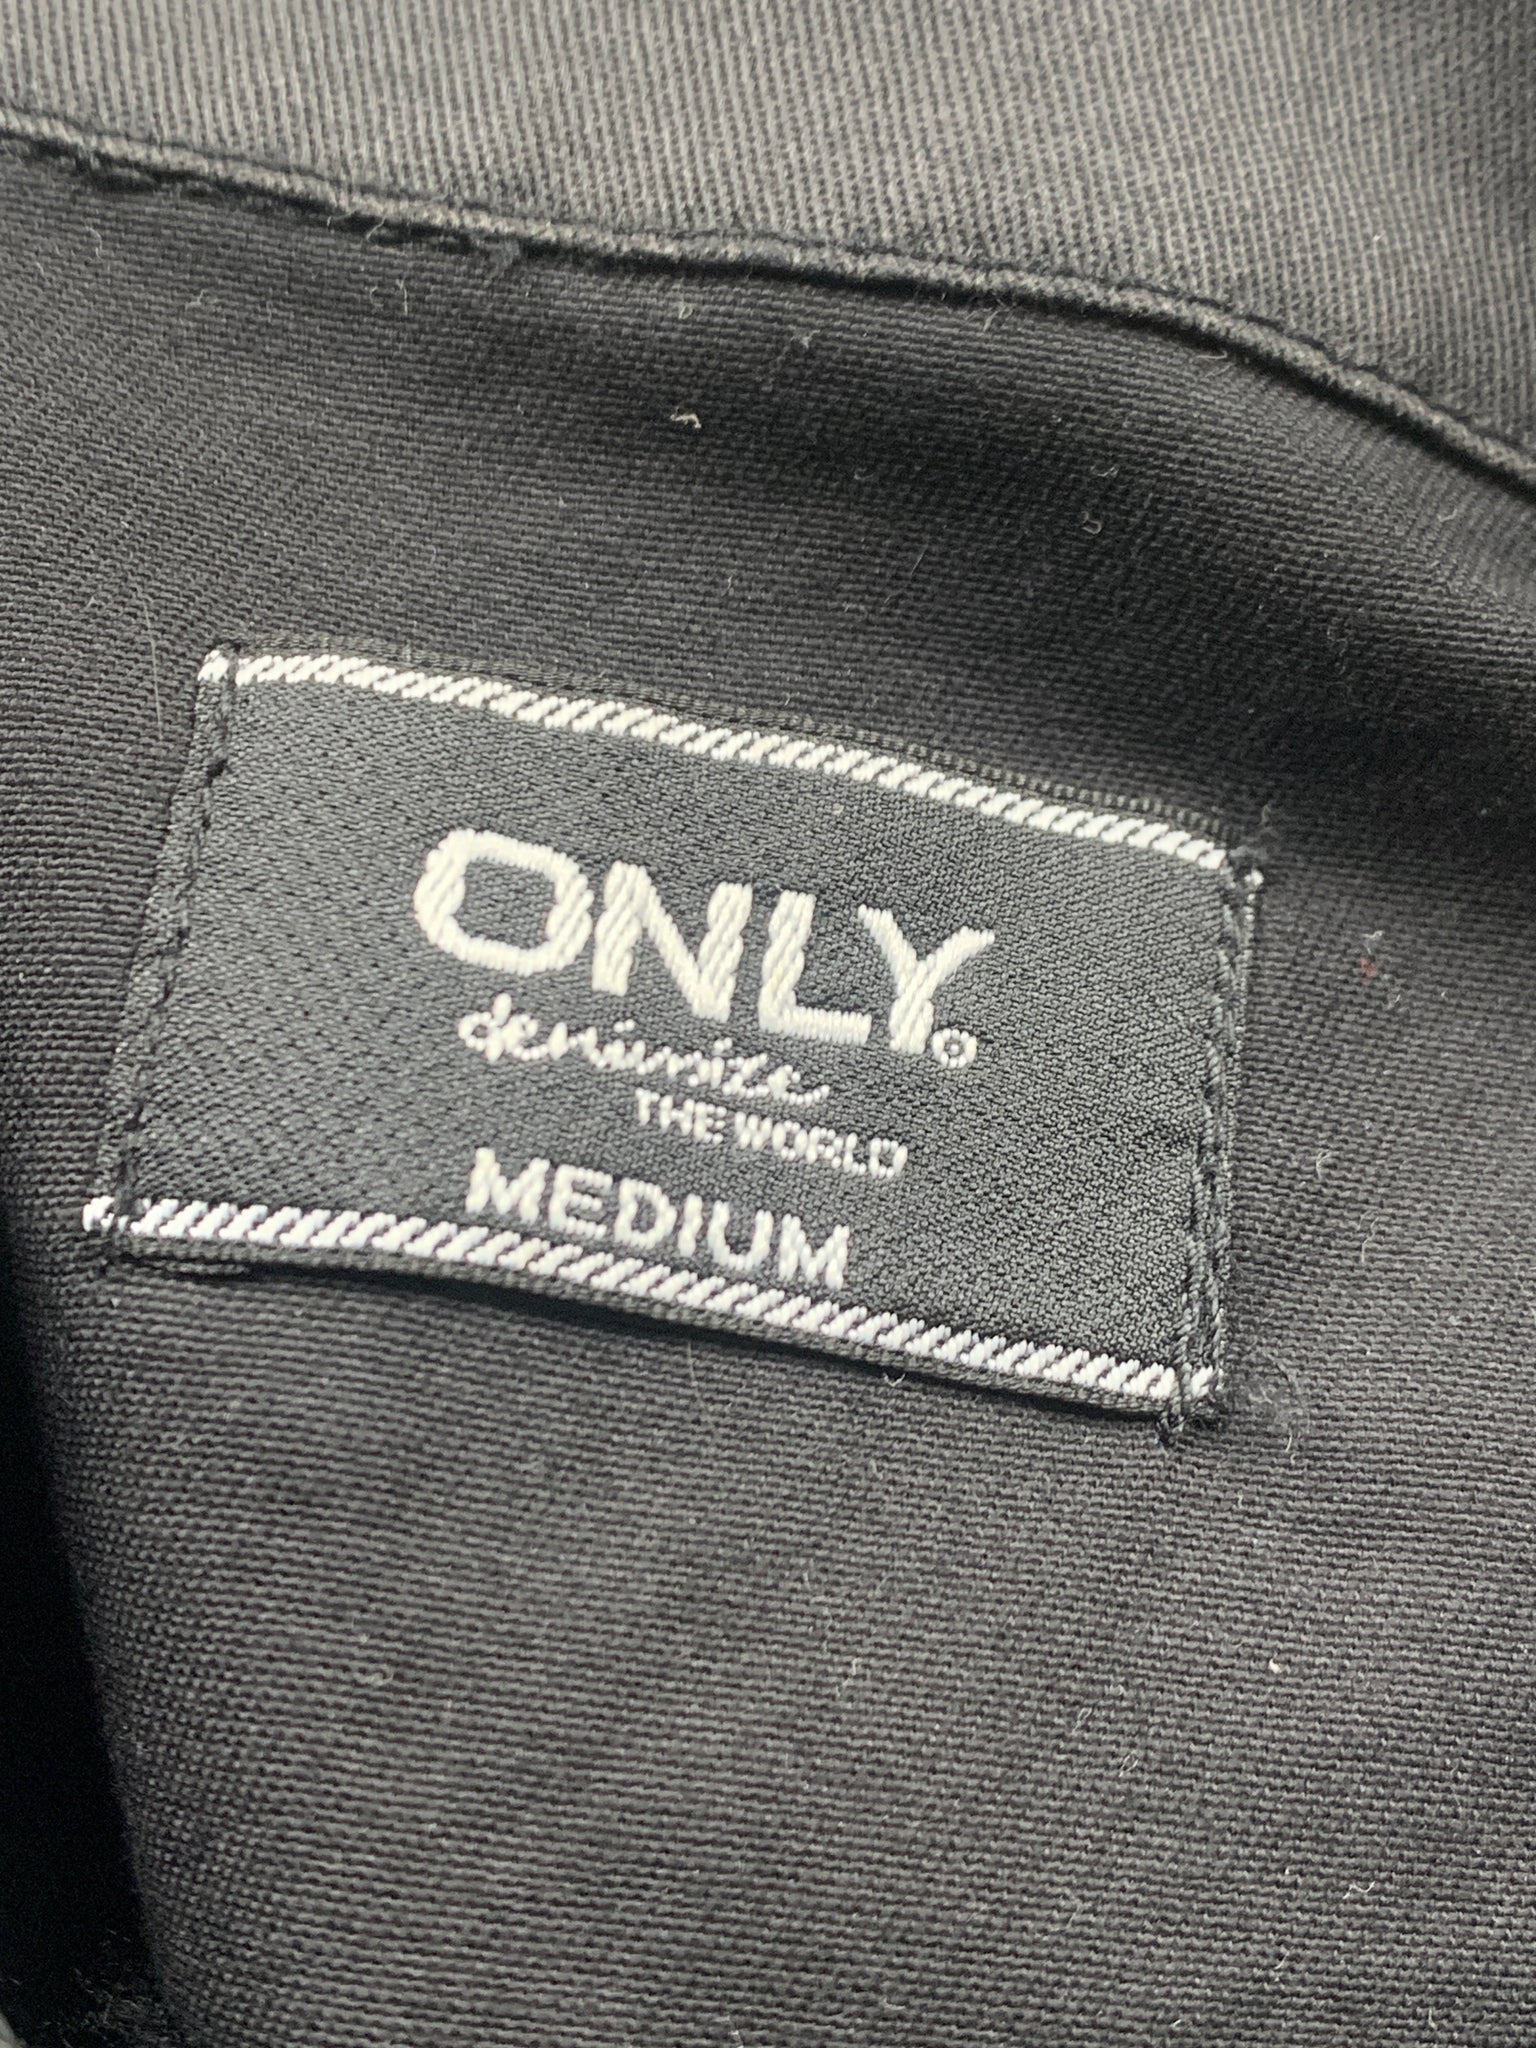 Only vest